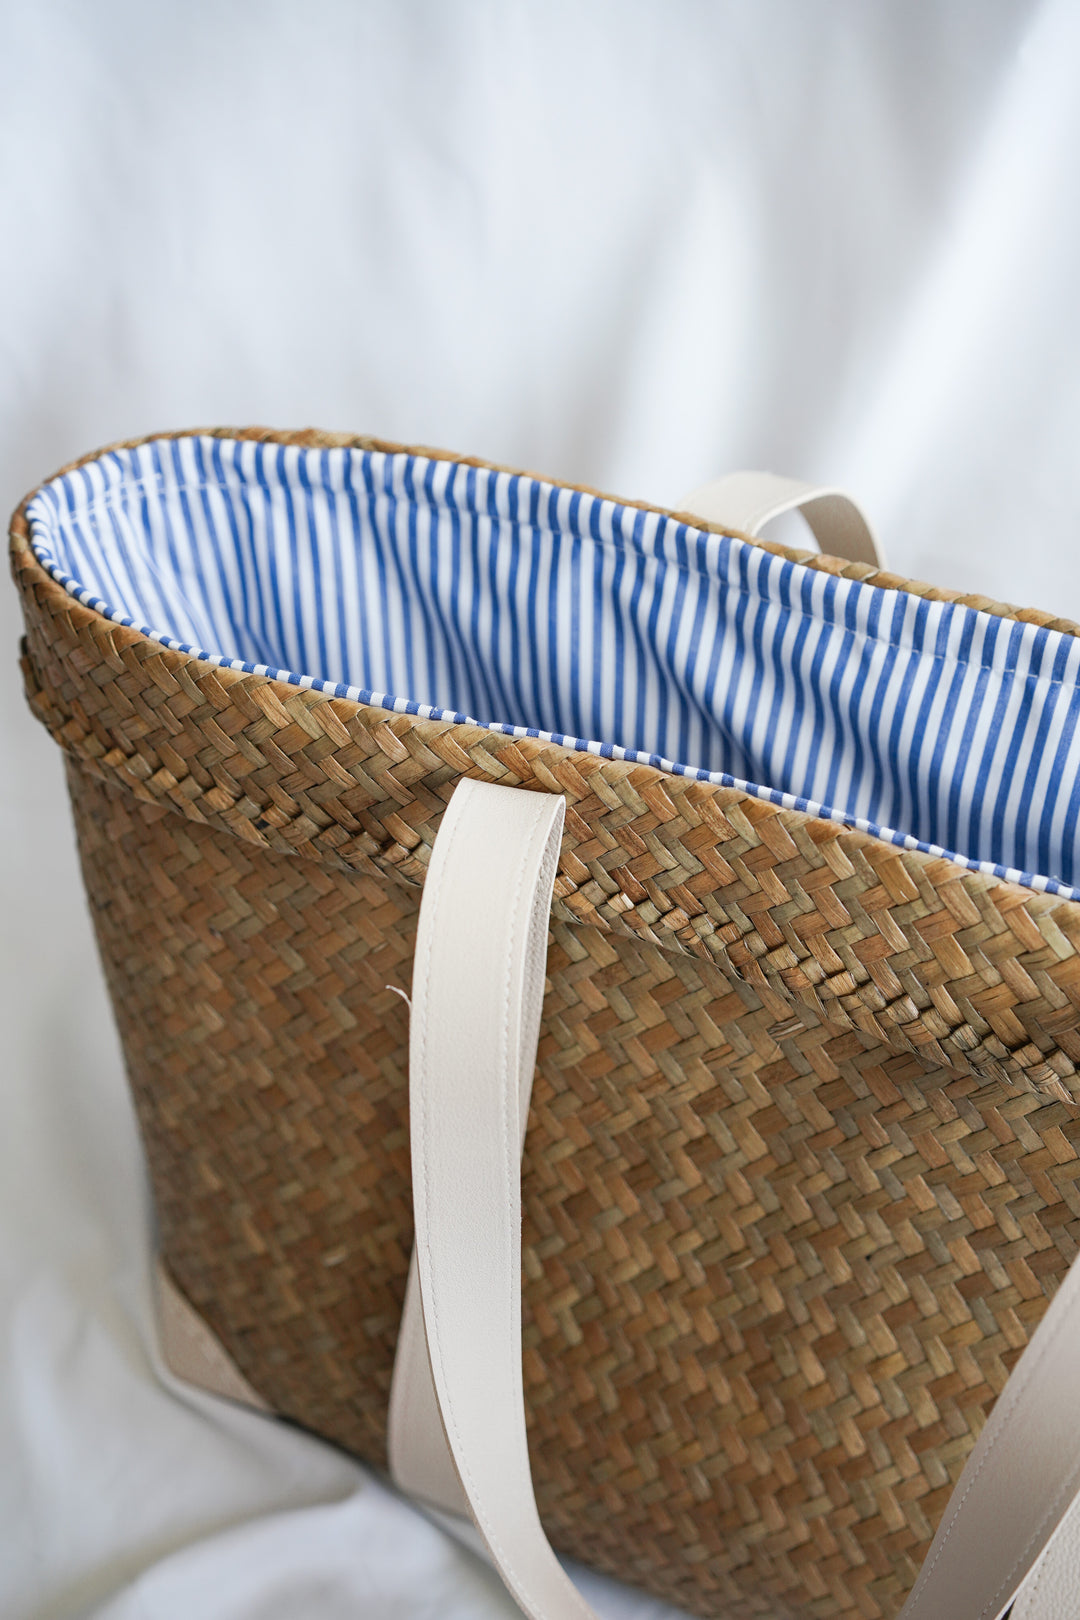 Drawstring Sedge Seagrass Basket tote bag with blue and white inner lining and faux leather handles